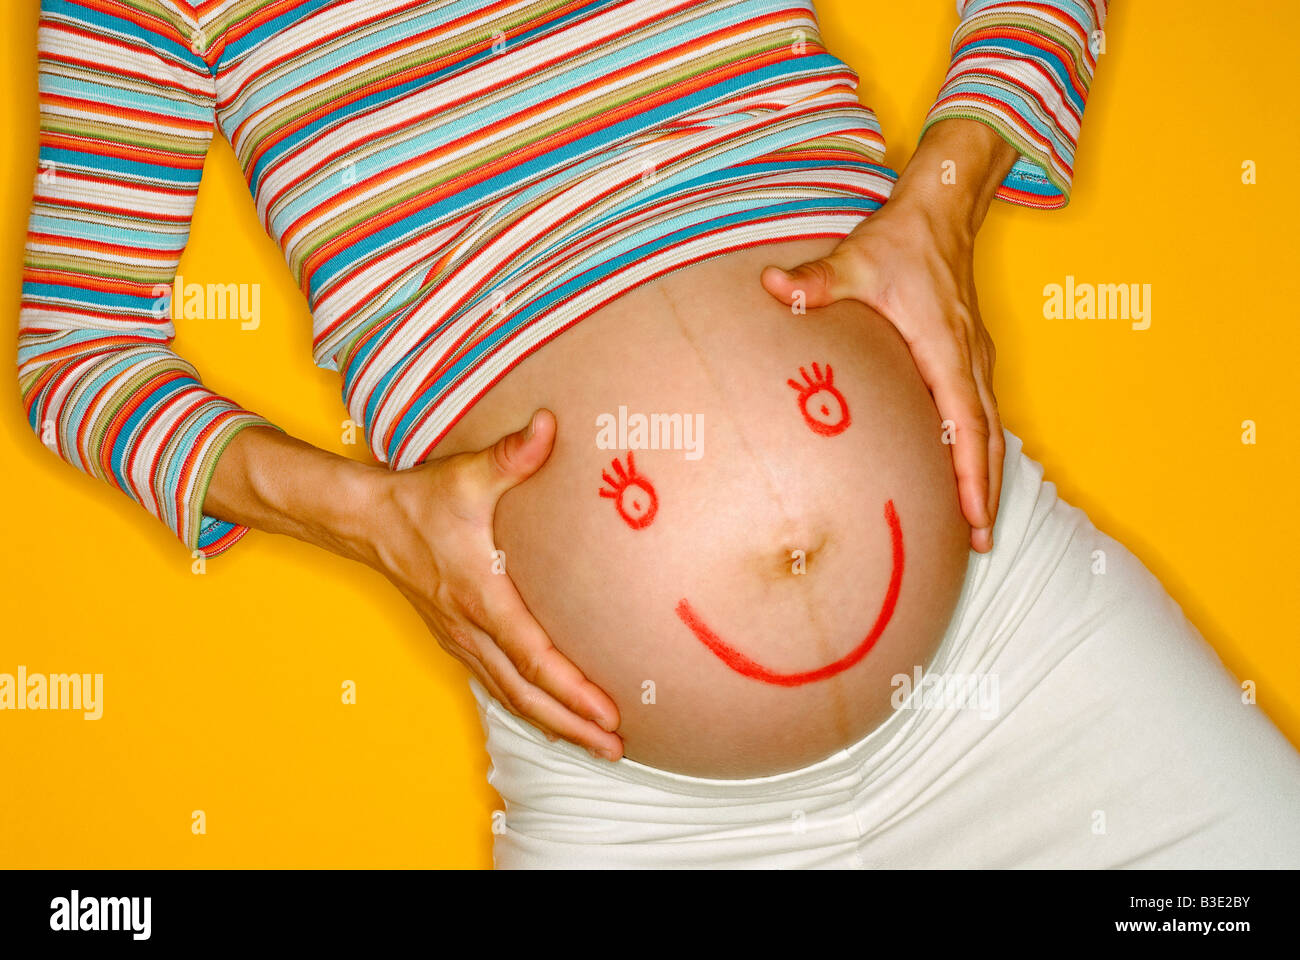 PREGNANT WOMAN PAINTED ON BELLY Stock Photo